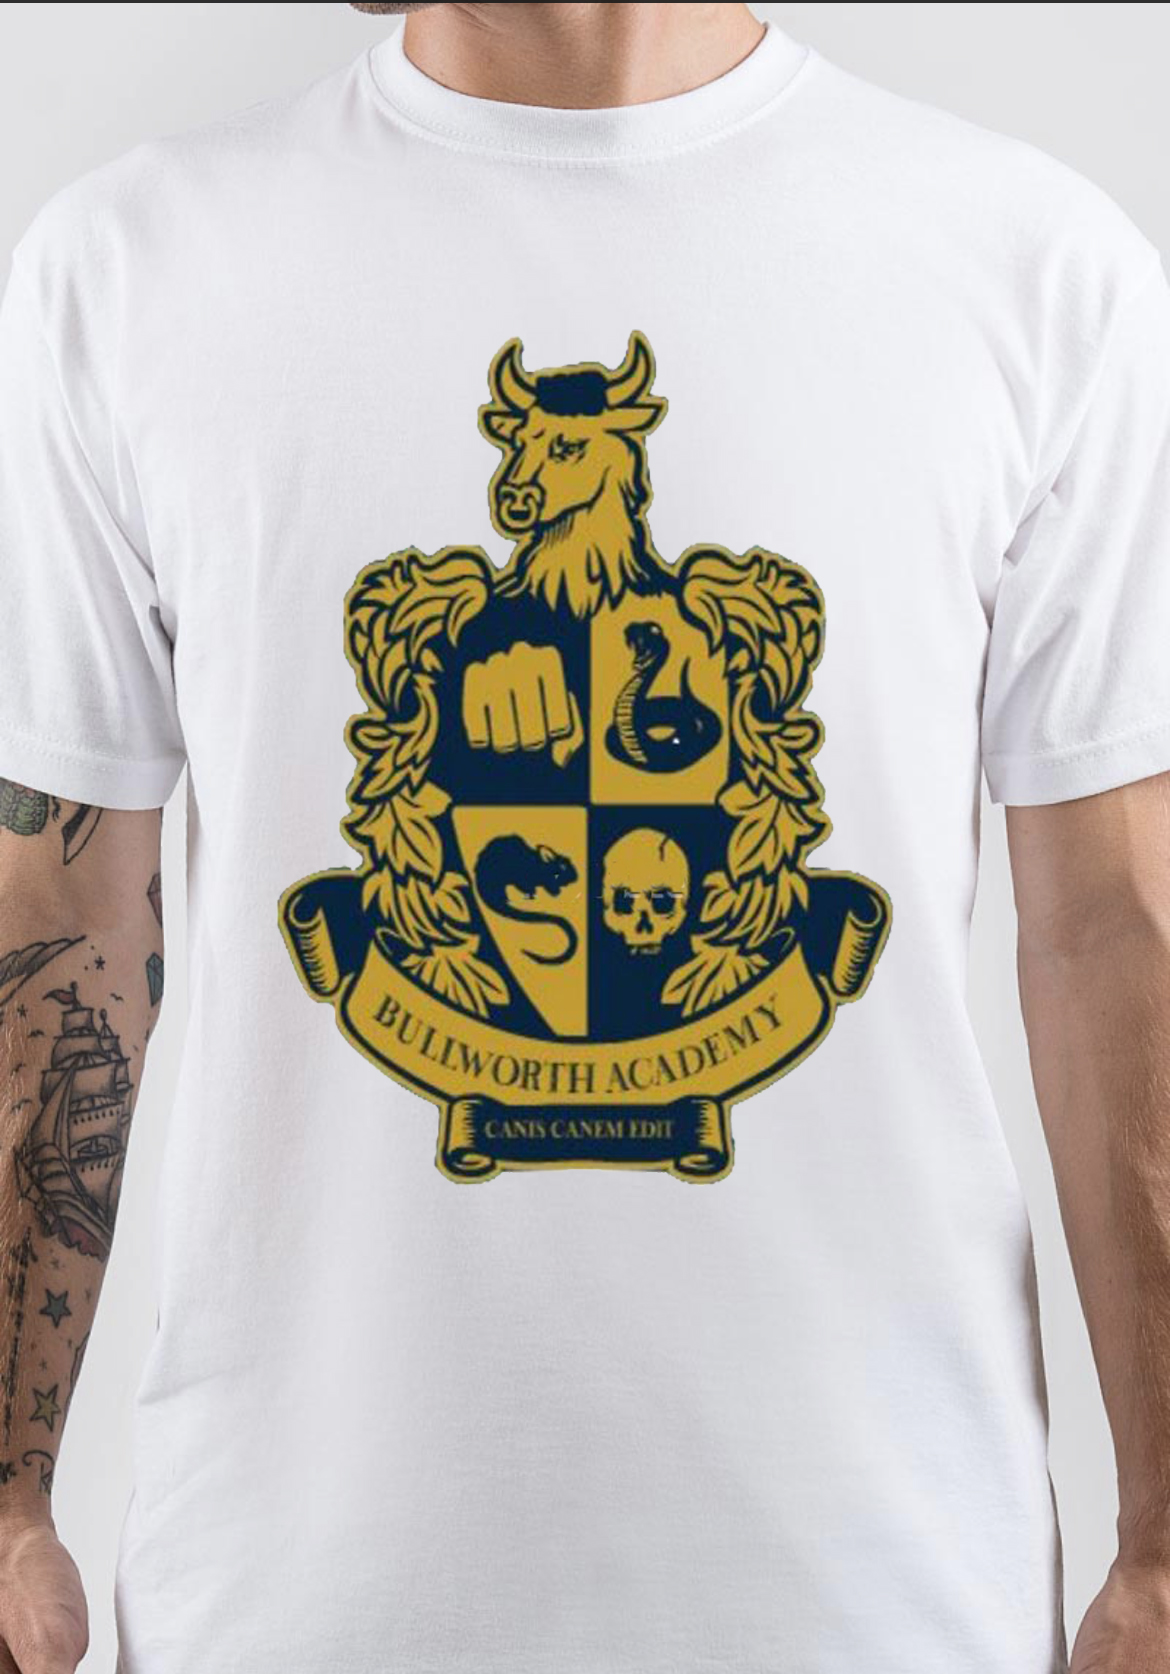 Bully T-Shirt And Merchandise